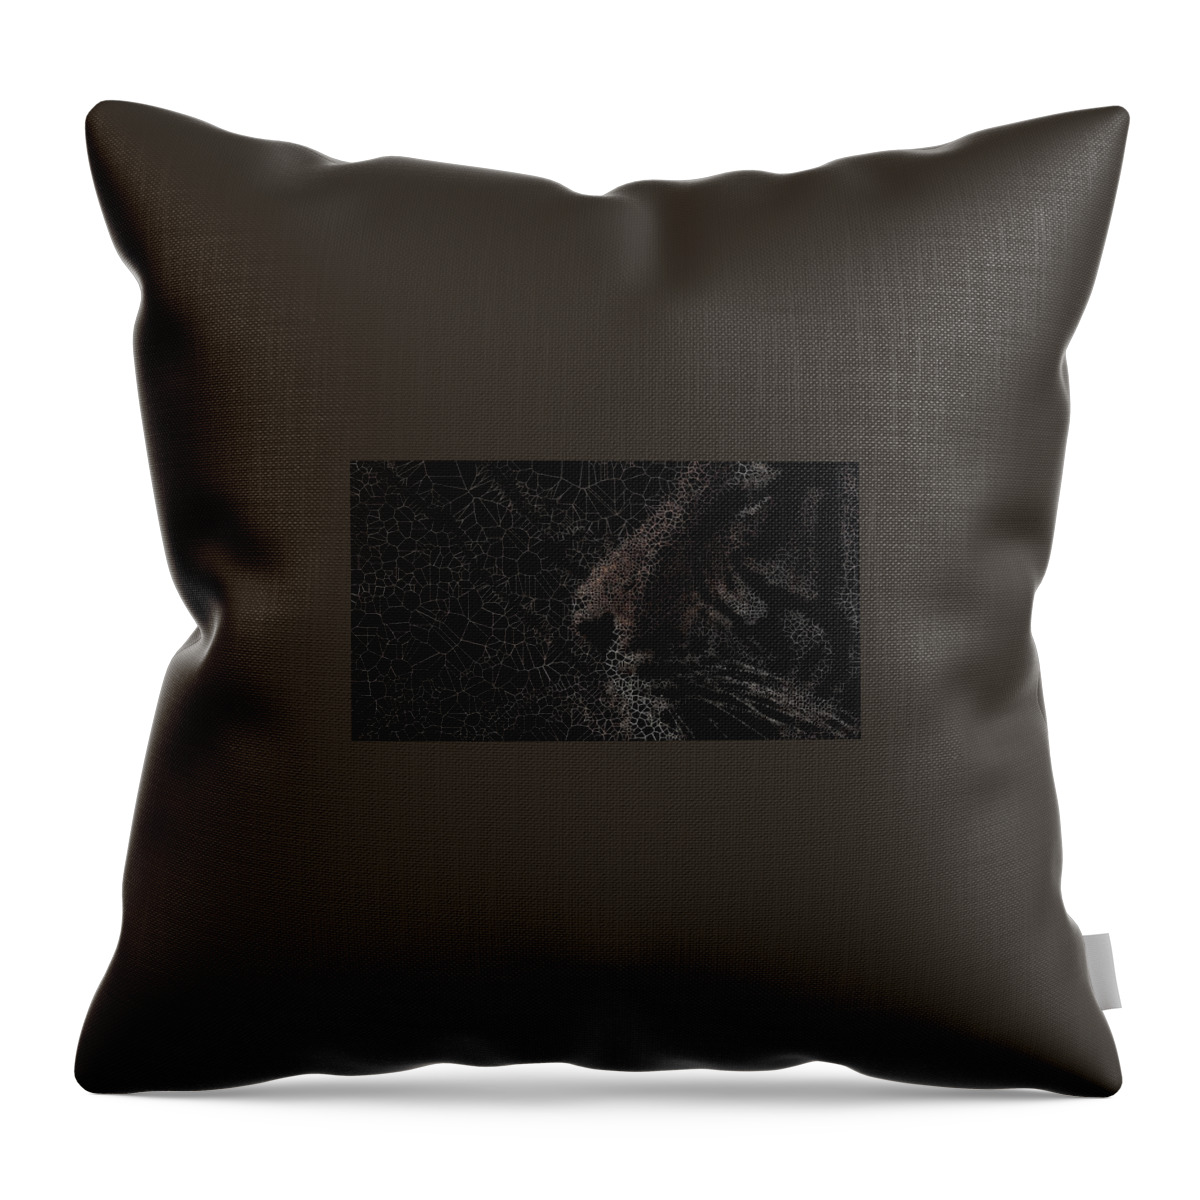 Vorotrans Throw Pillow featuring the digital art Think by Stephane Poirier